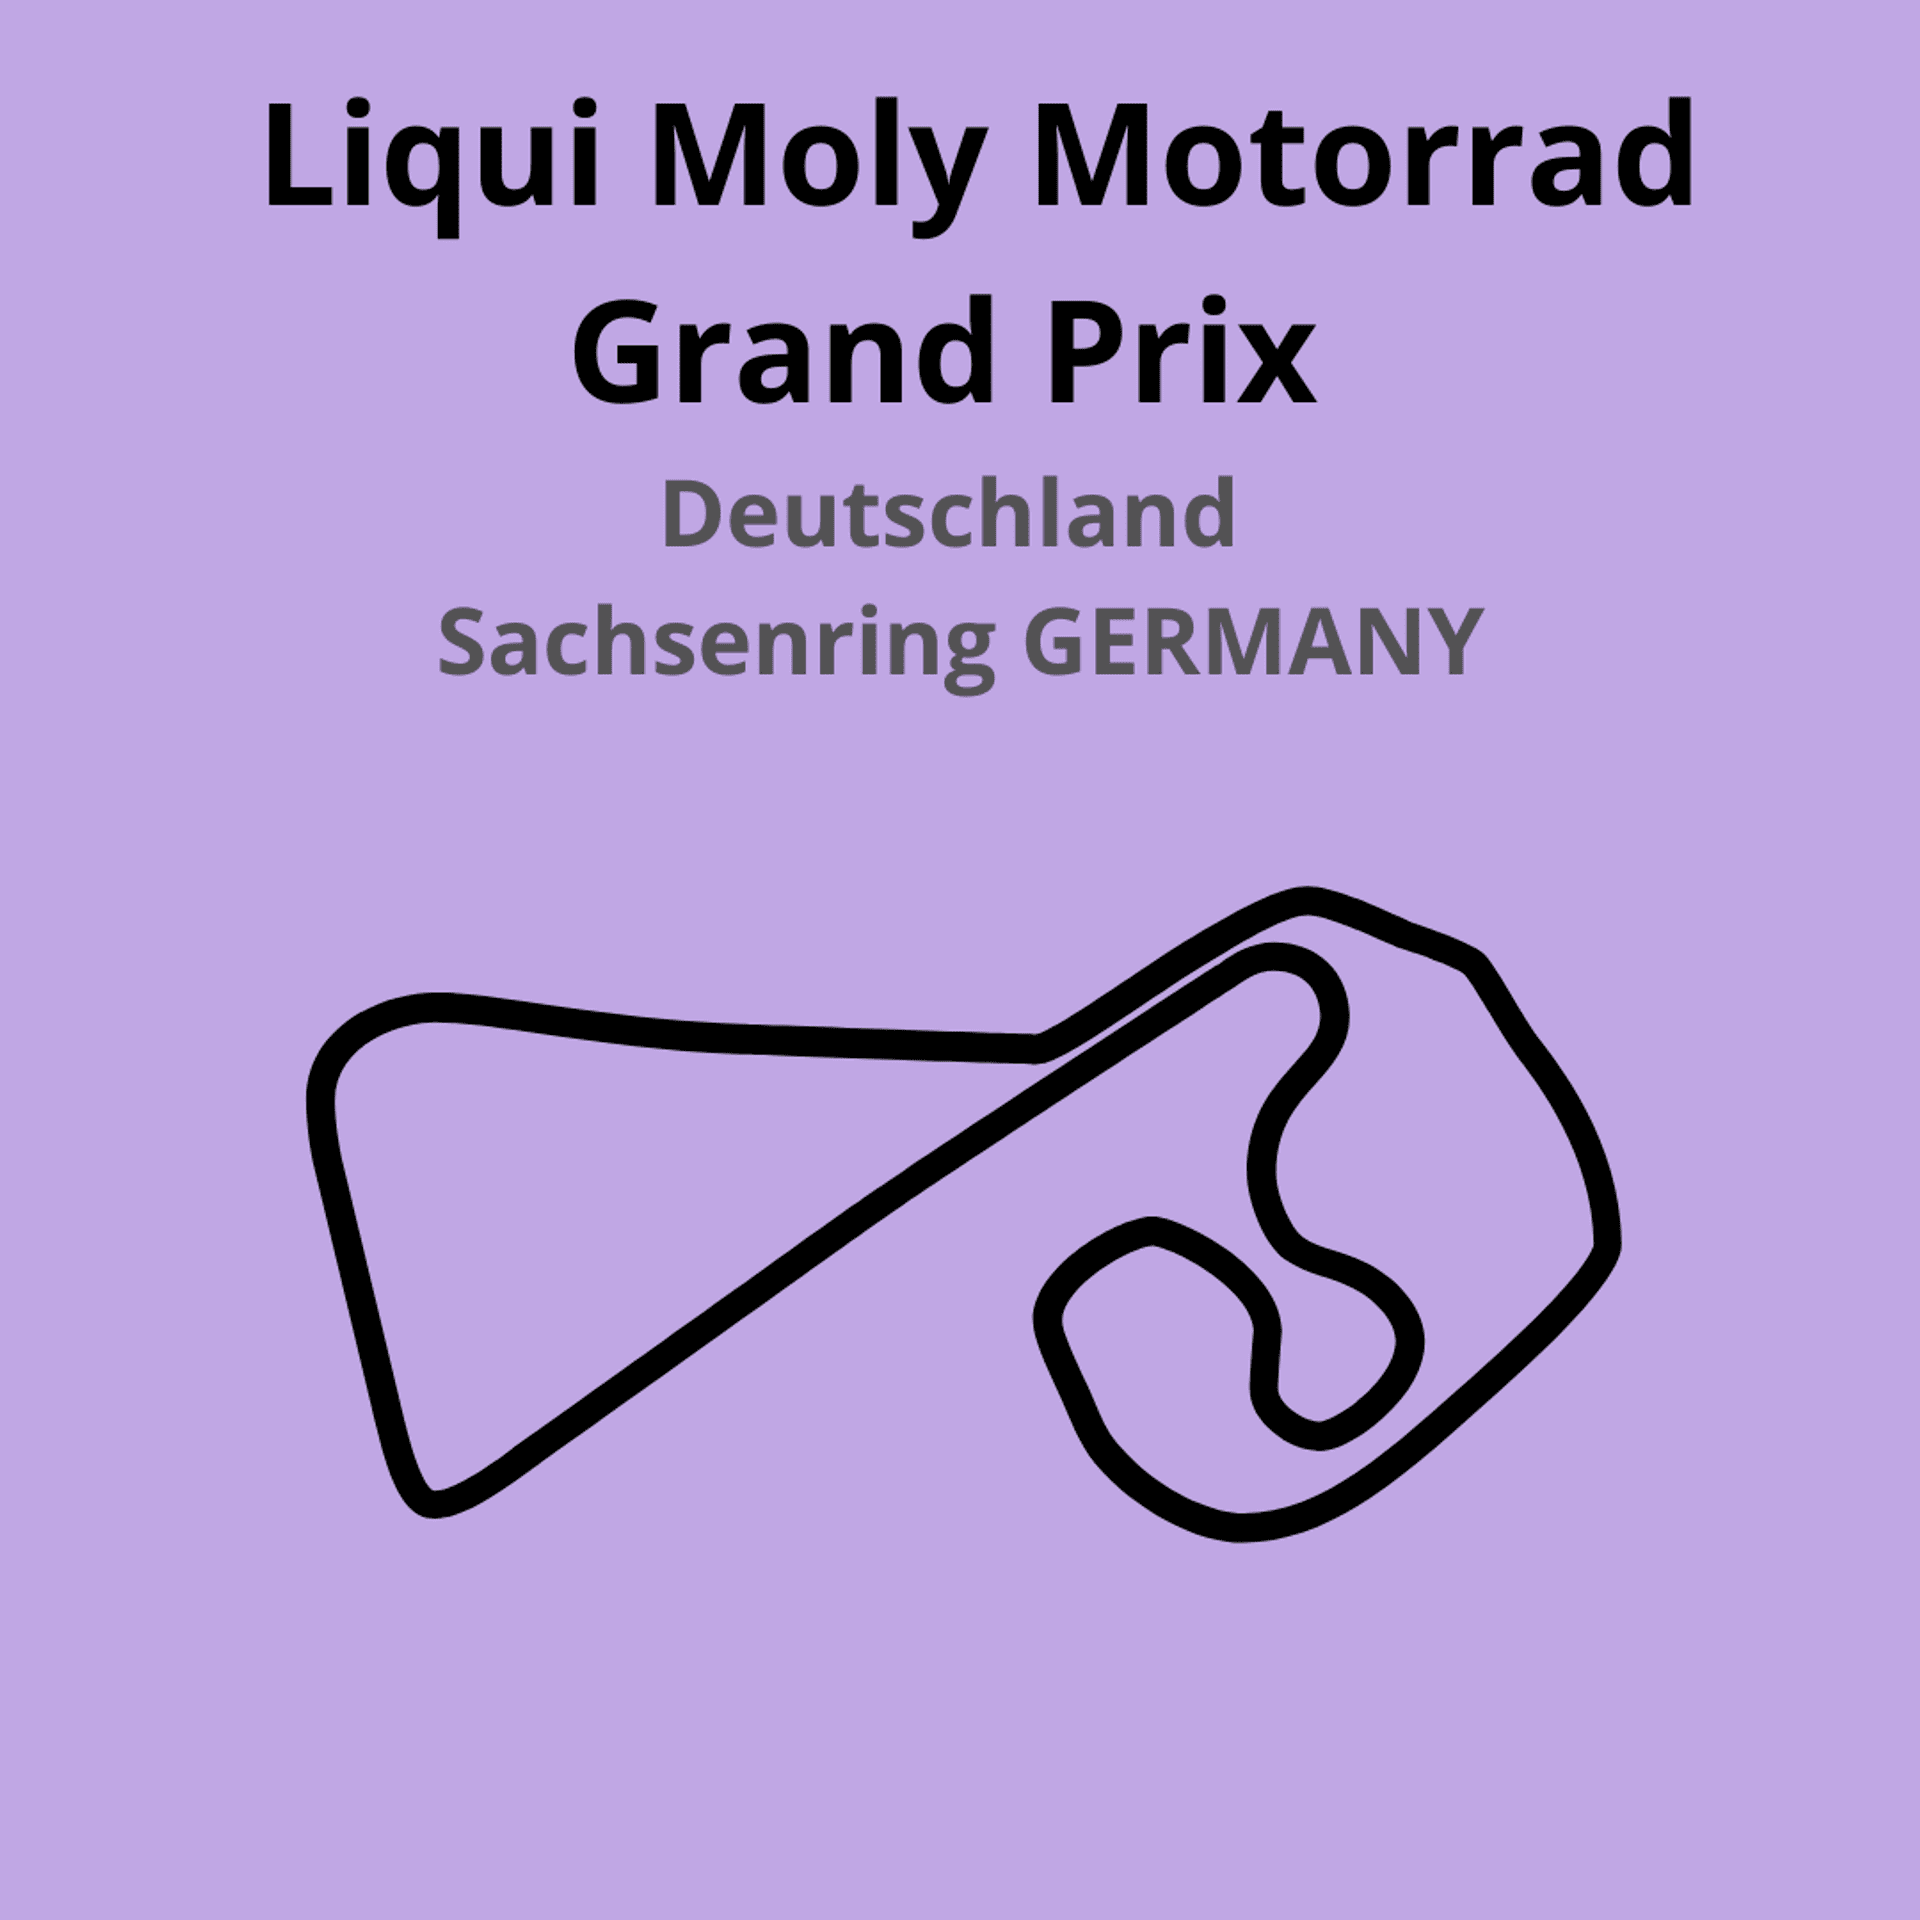 Liqui Molly Motorrad Grand Prix. Discover all the races of the moto world championship 2021. the characteristics of every circuit, the records and difficulties.